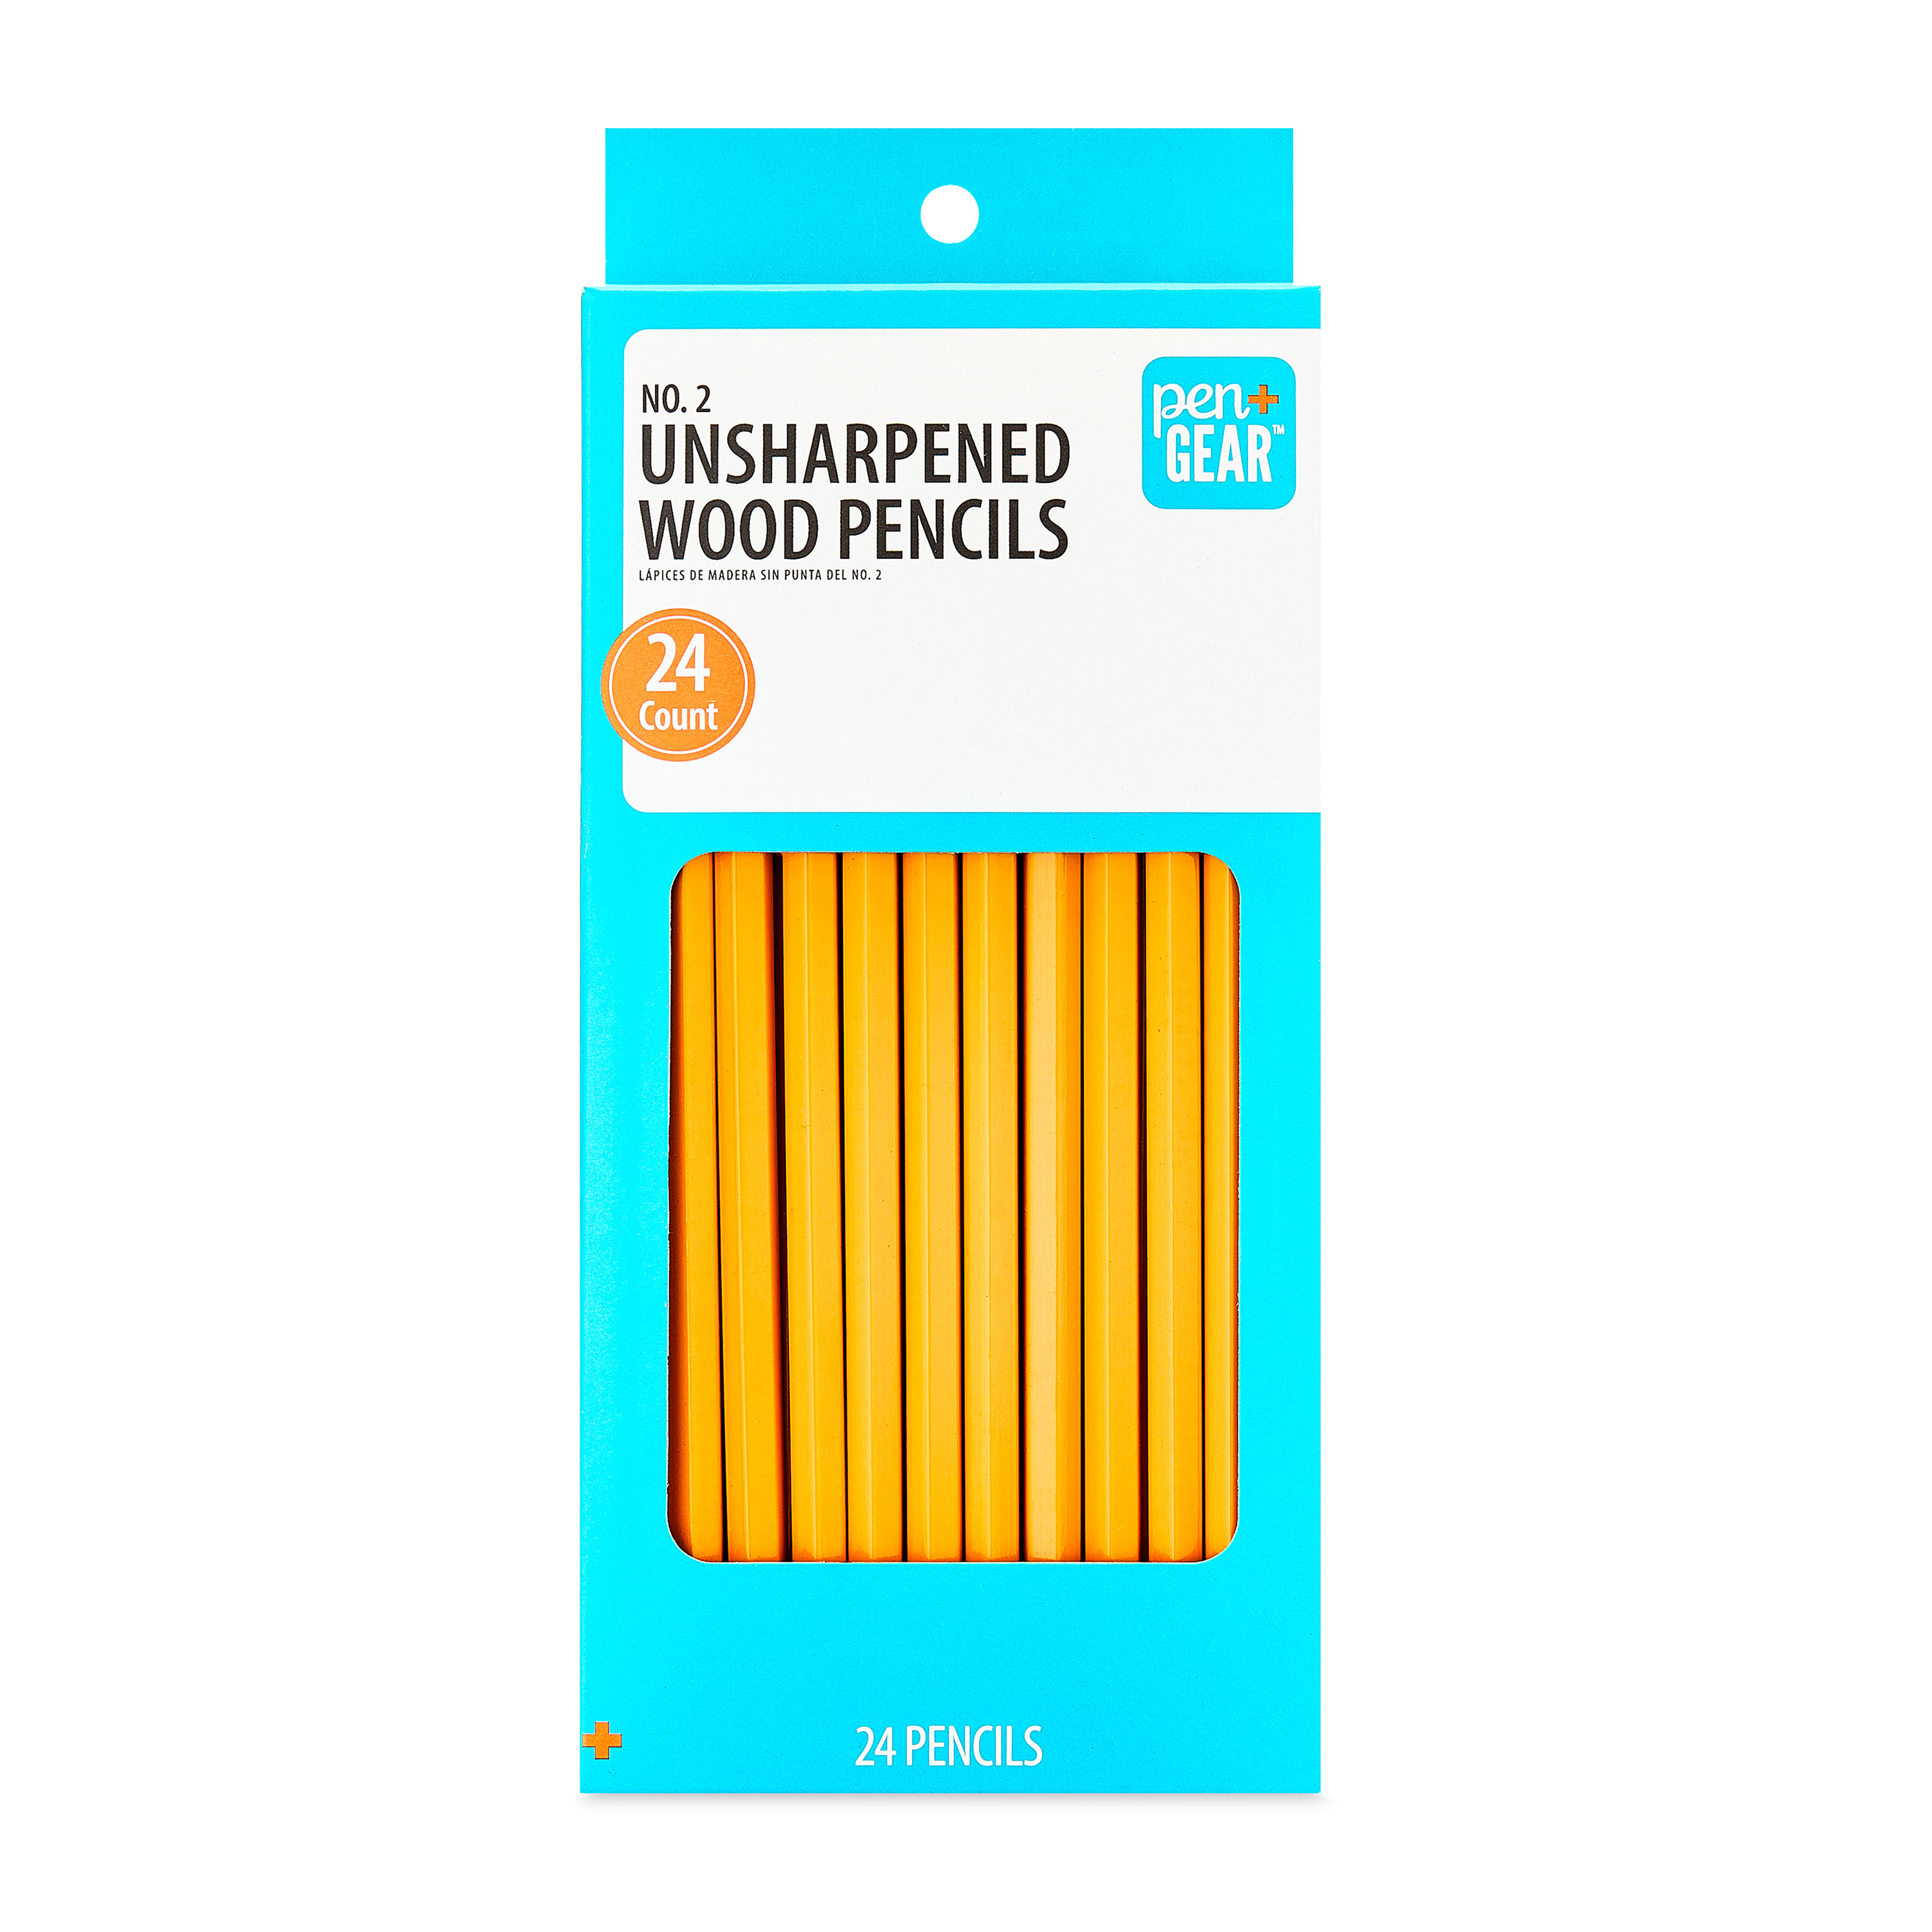 Pen+Gear No. 2 Wood Pencils, Unsharpened, 24 Count - image 1 of 9